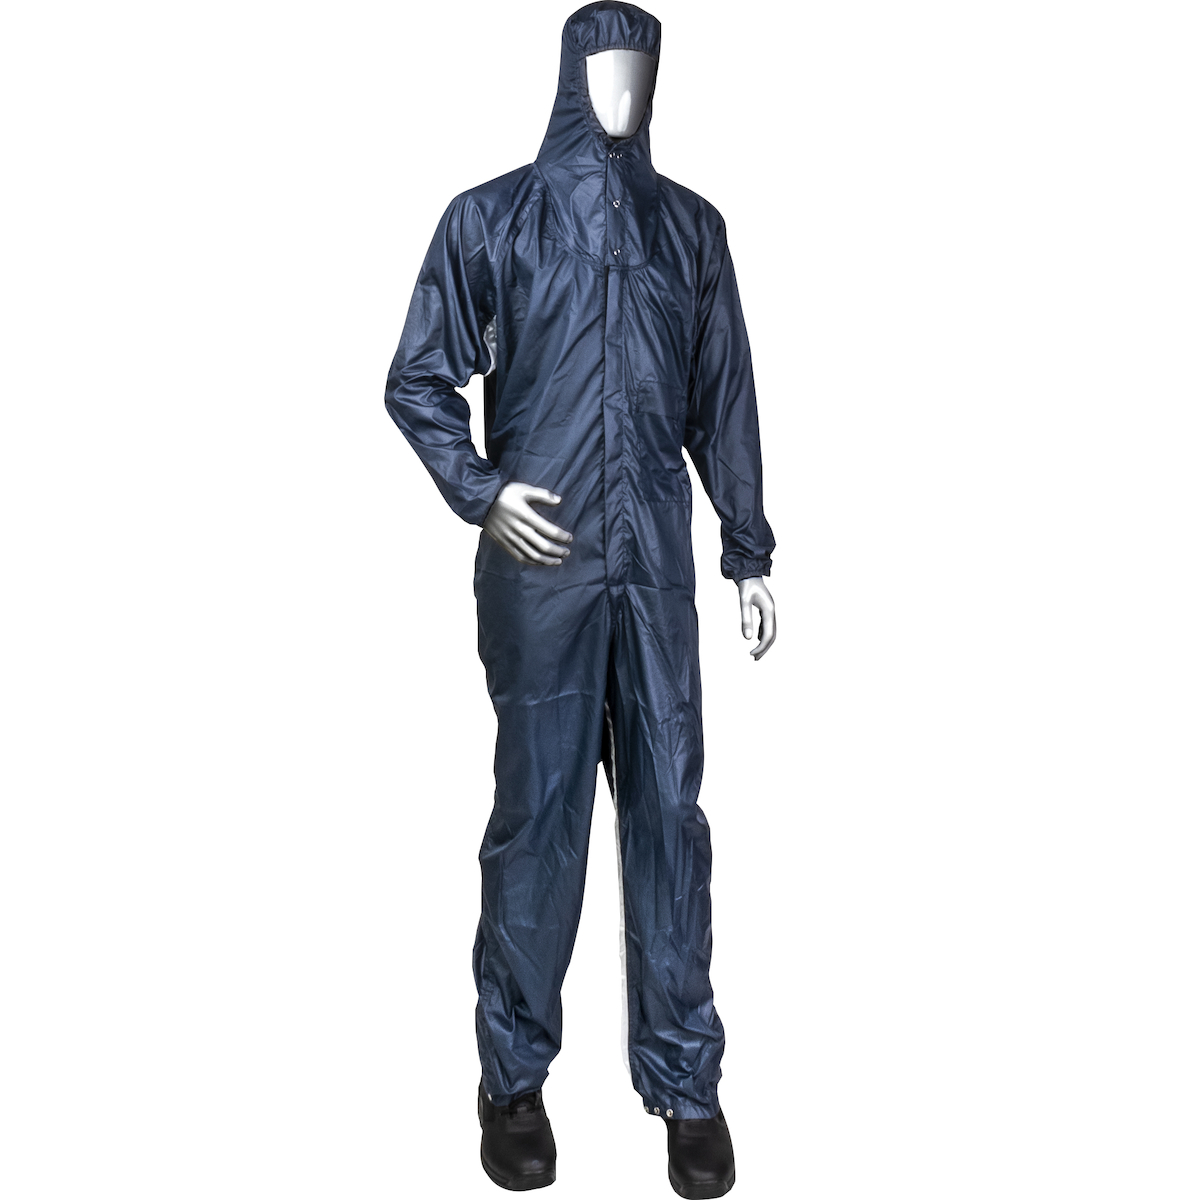 CCNQH2-26NV  Uniform Technology™ Spray Paint / Powder Coating Reusable Hooded Coveralls - Navy